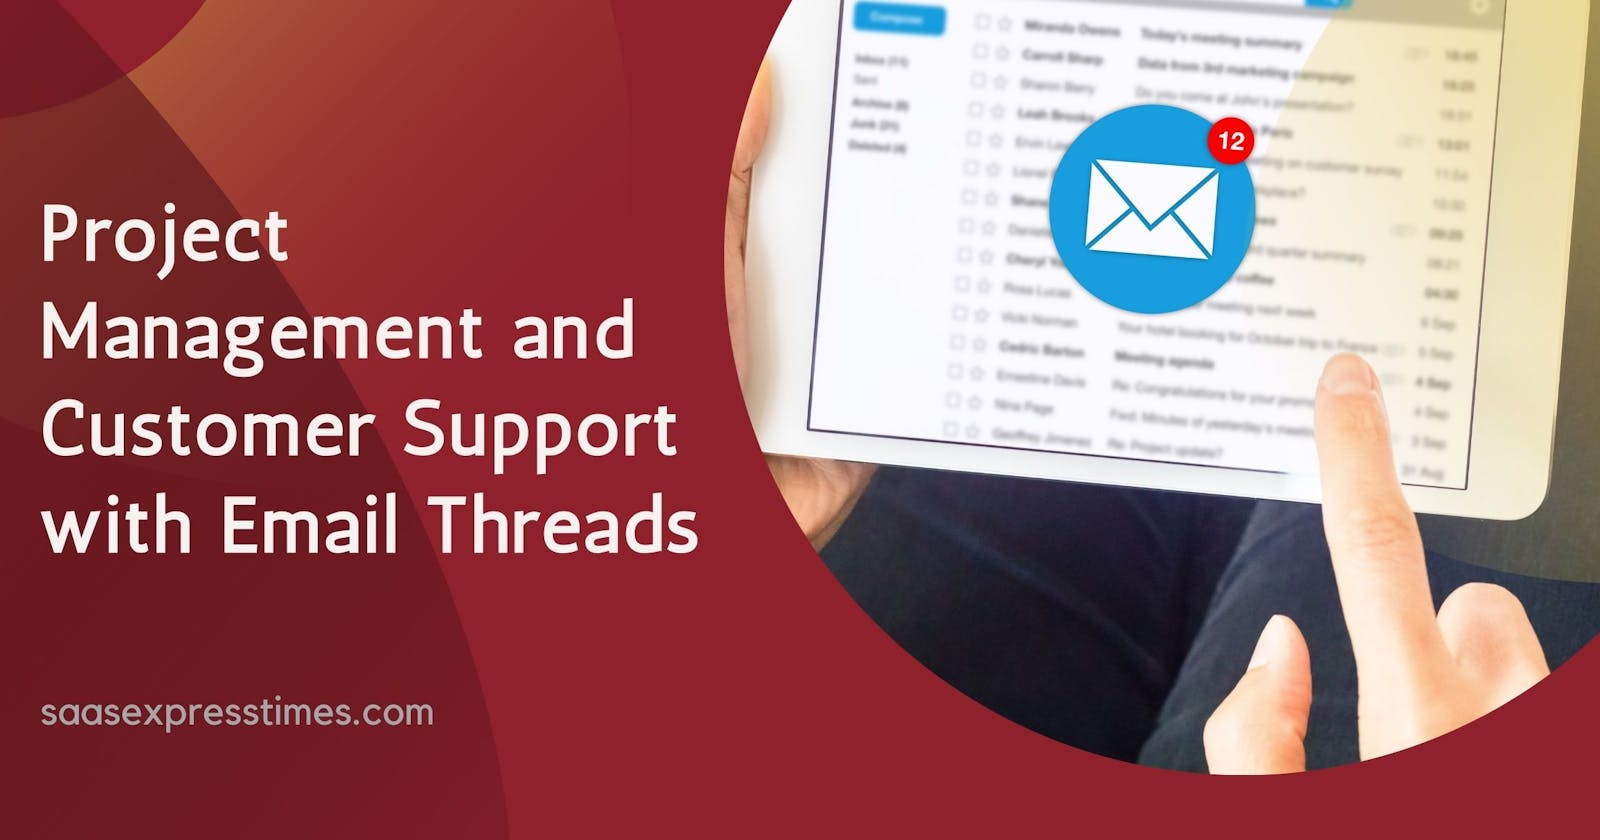 Project Management and Customer Support with Email Threads